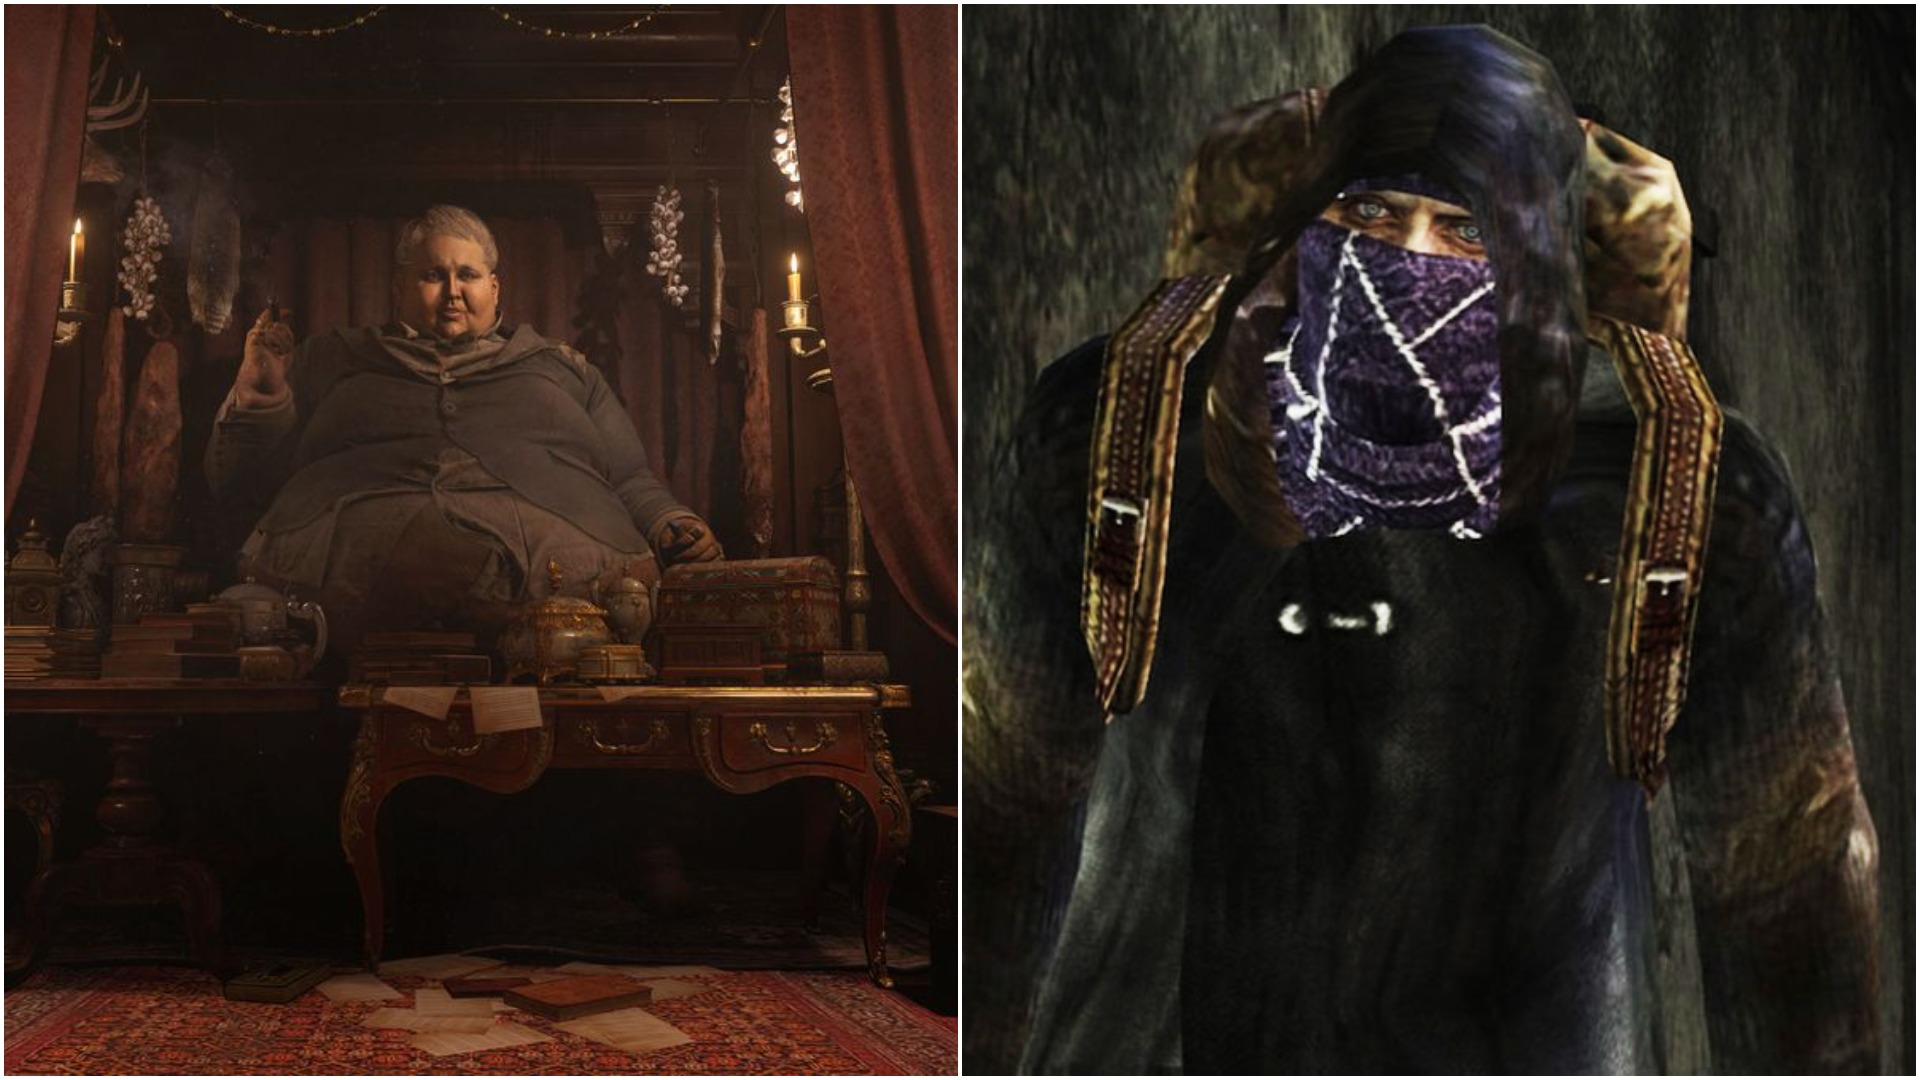 The Merchant From Resident Evil 4 Is Great